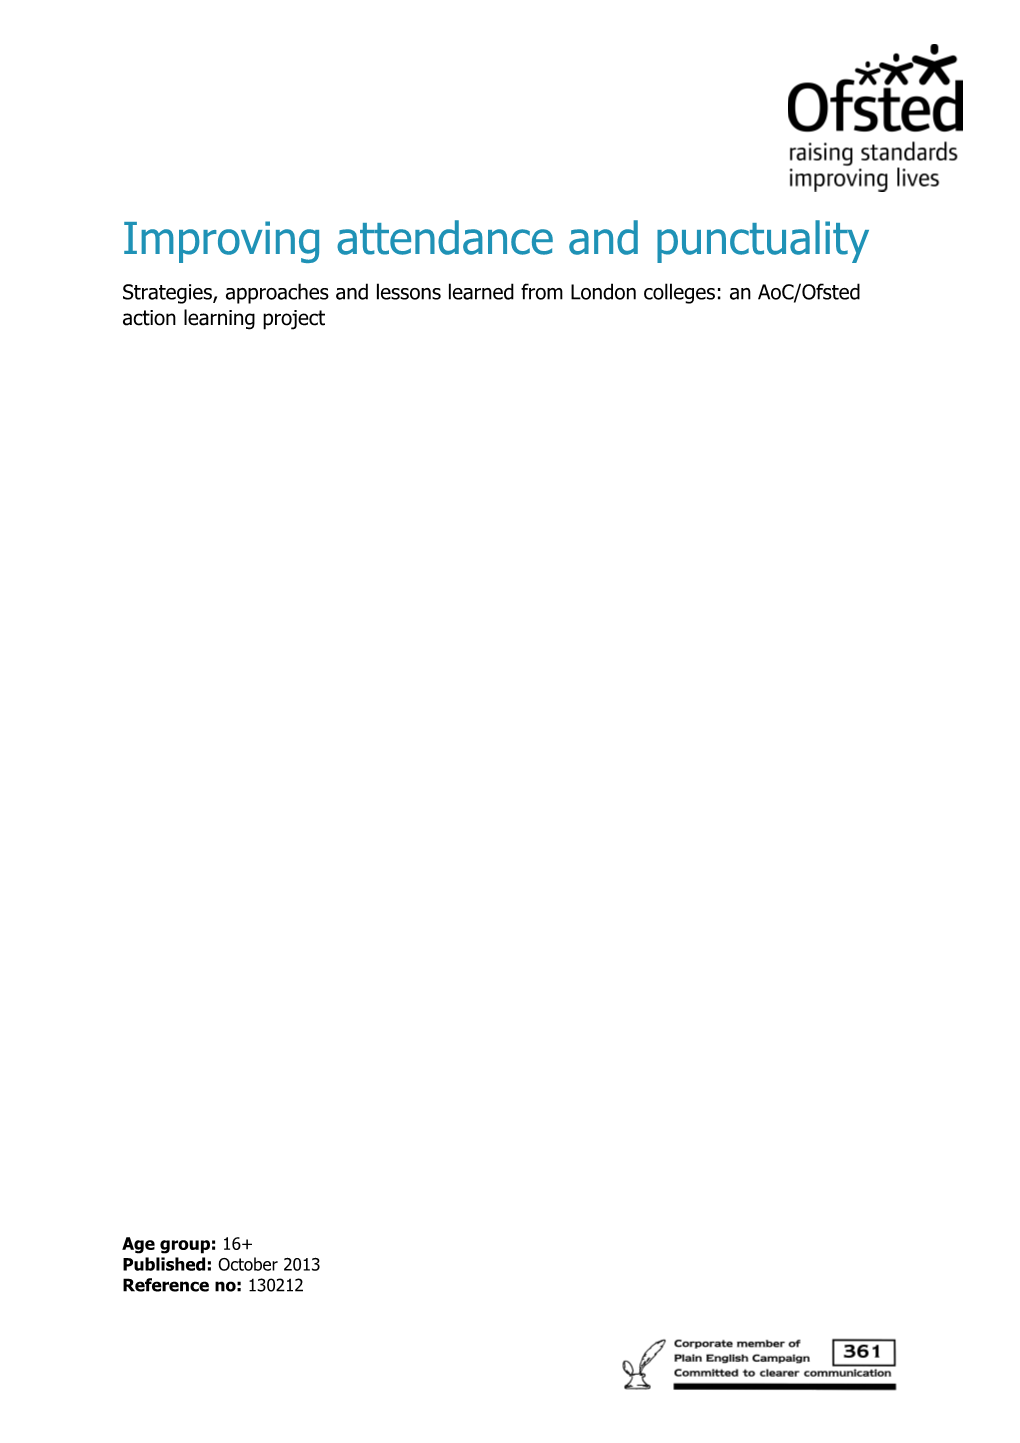 Improving Attendance and Punctuality